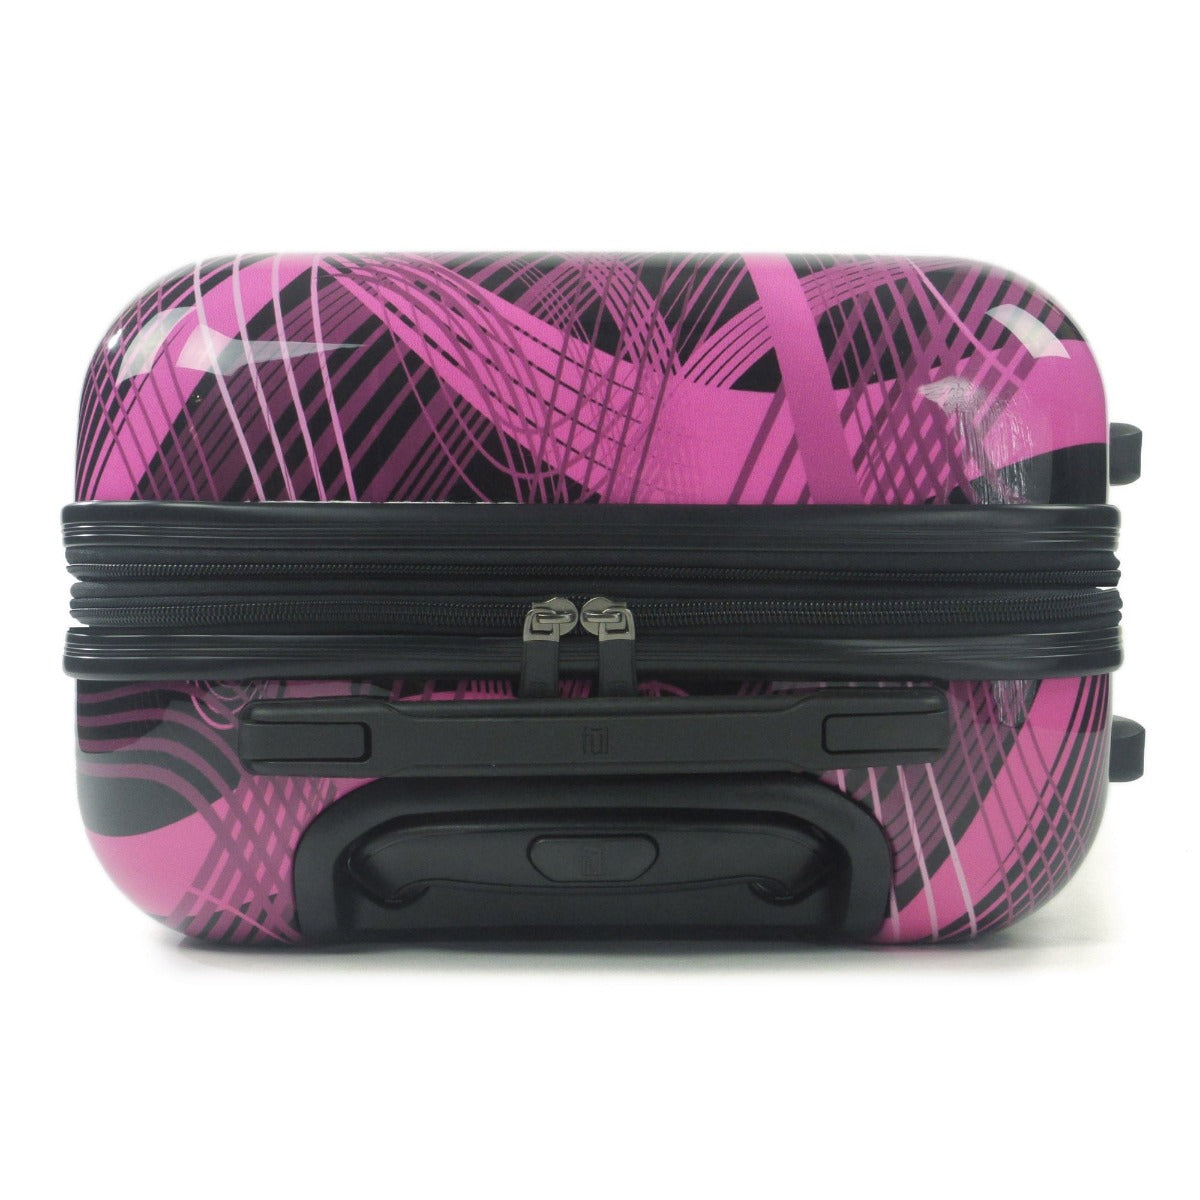 FUL Rolling Luggage Pink Neon Laser 24" Pink and Black